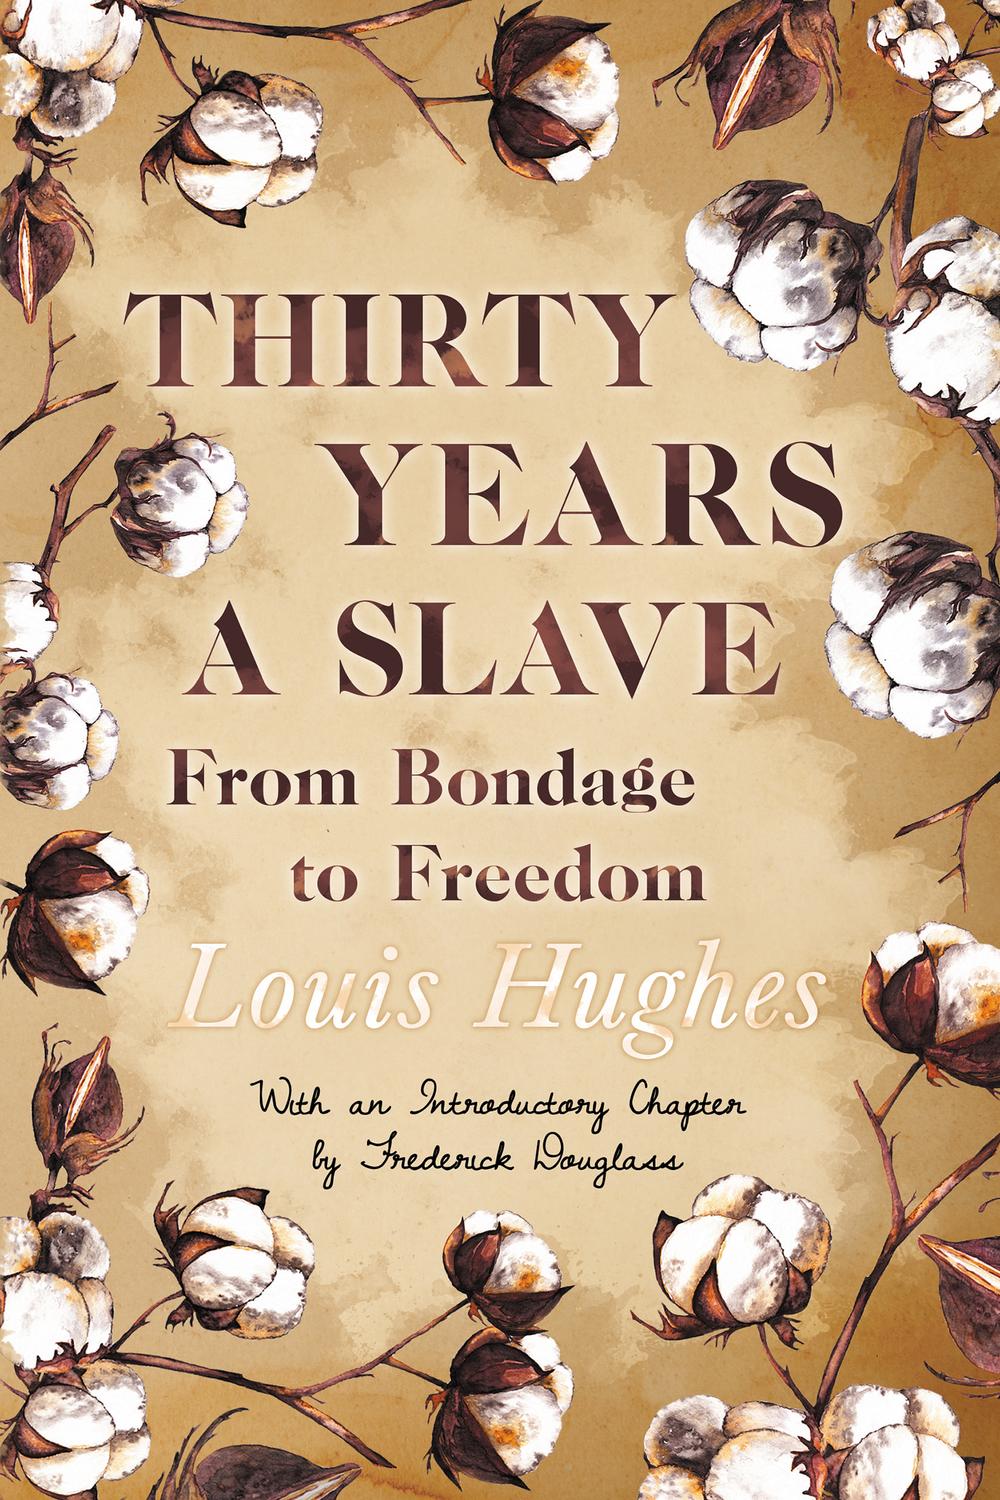 Thirty Years a Slave - From Bondage to Freedom - Louis Hughes, Frederick Douglass